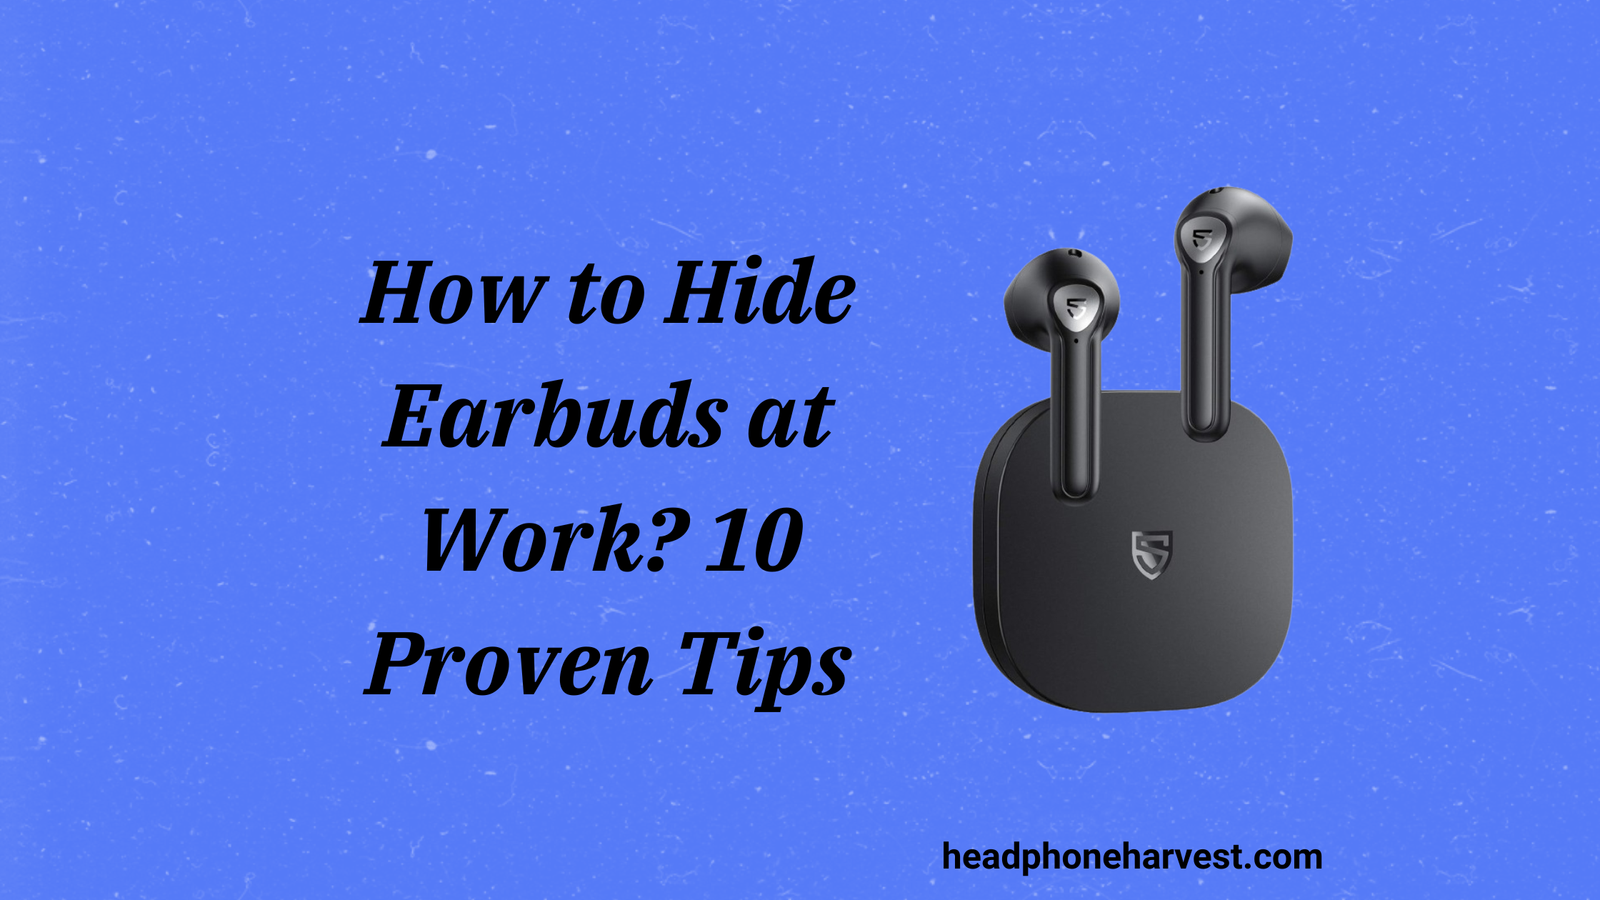 How to Hide Earbuds at Work